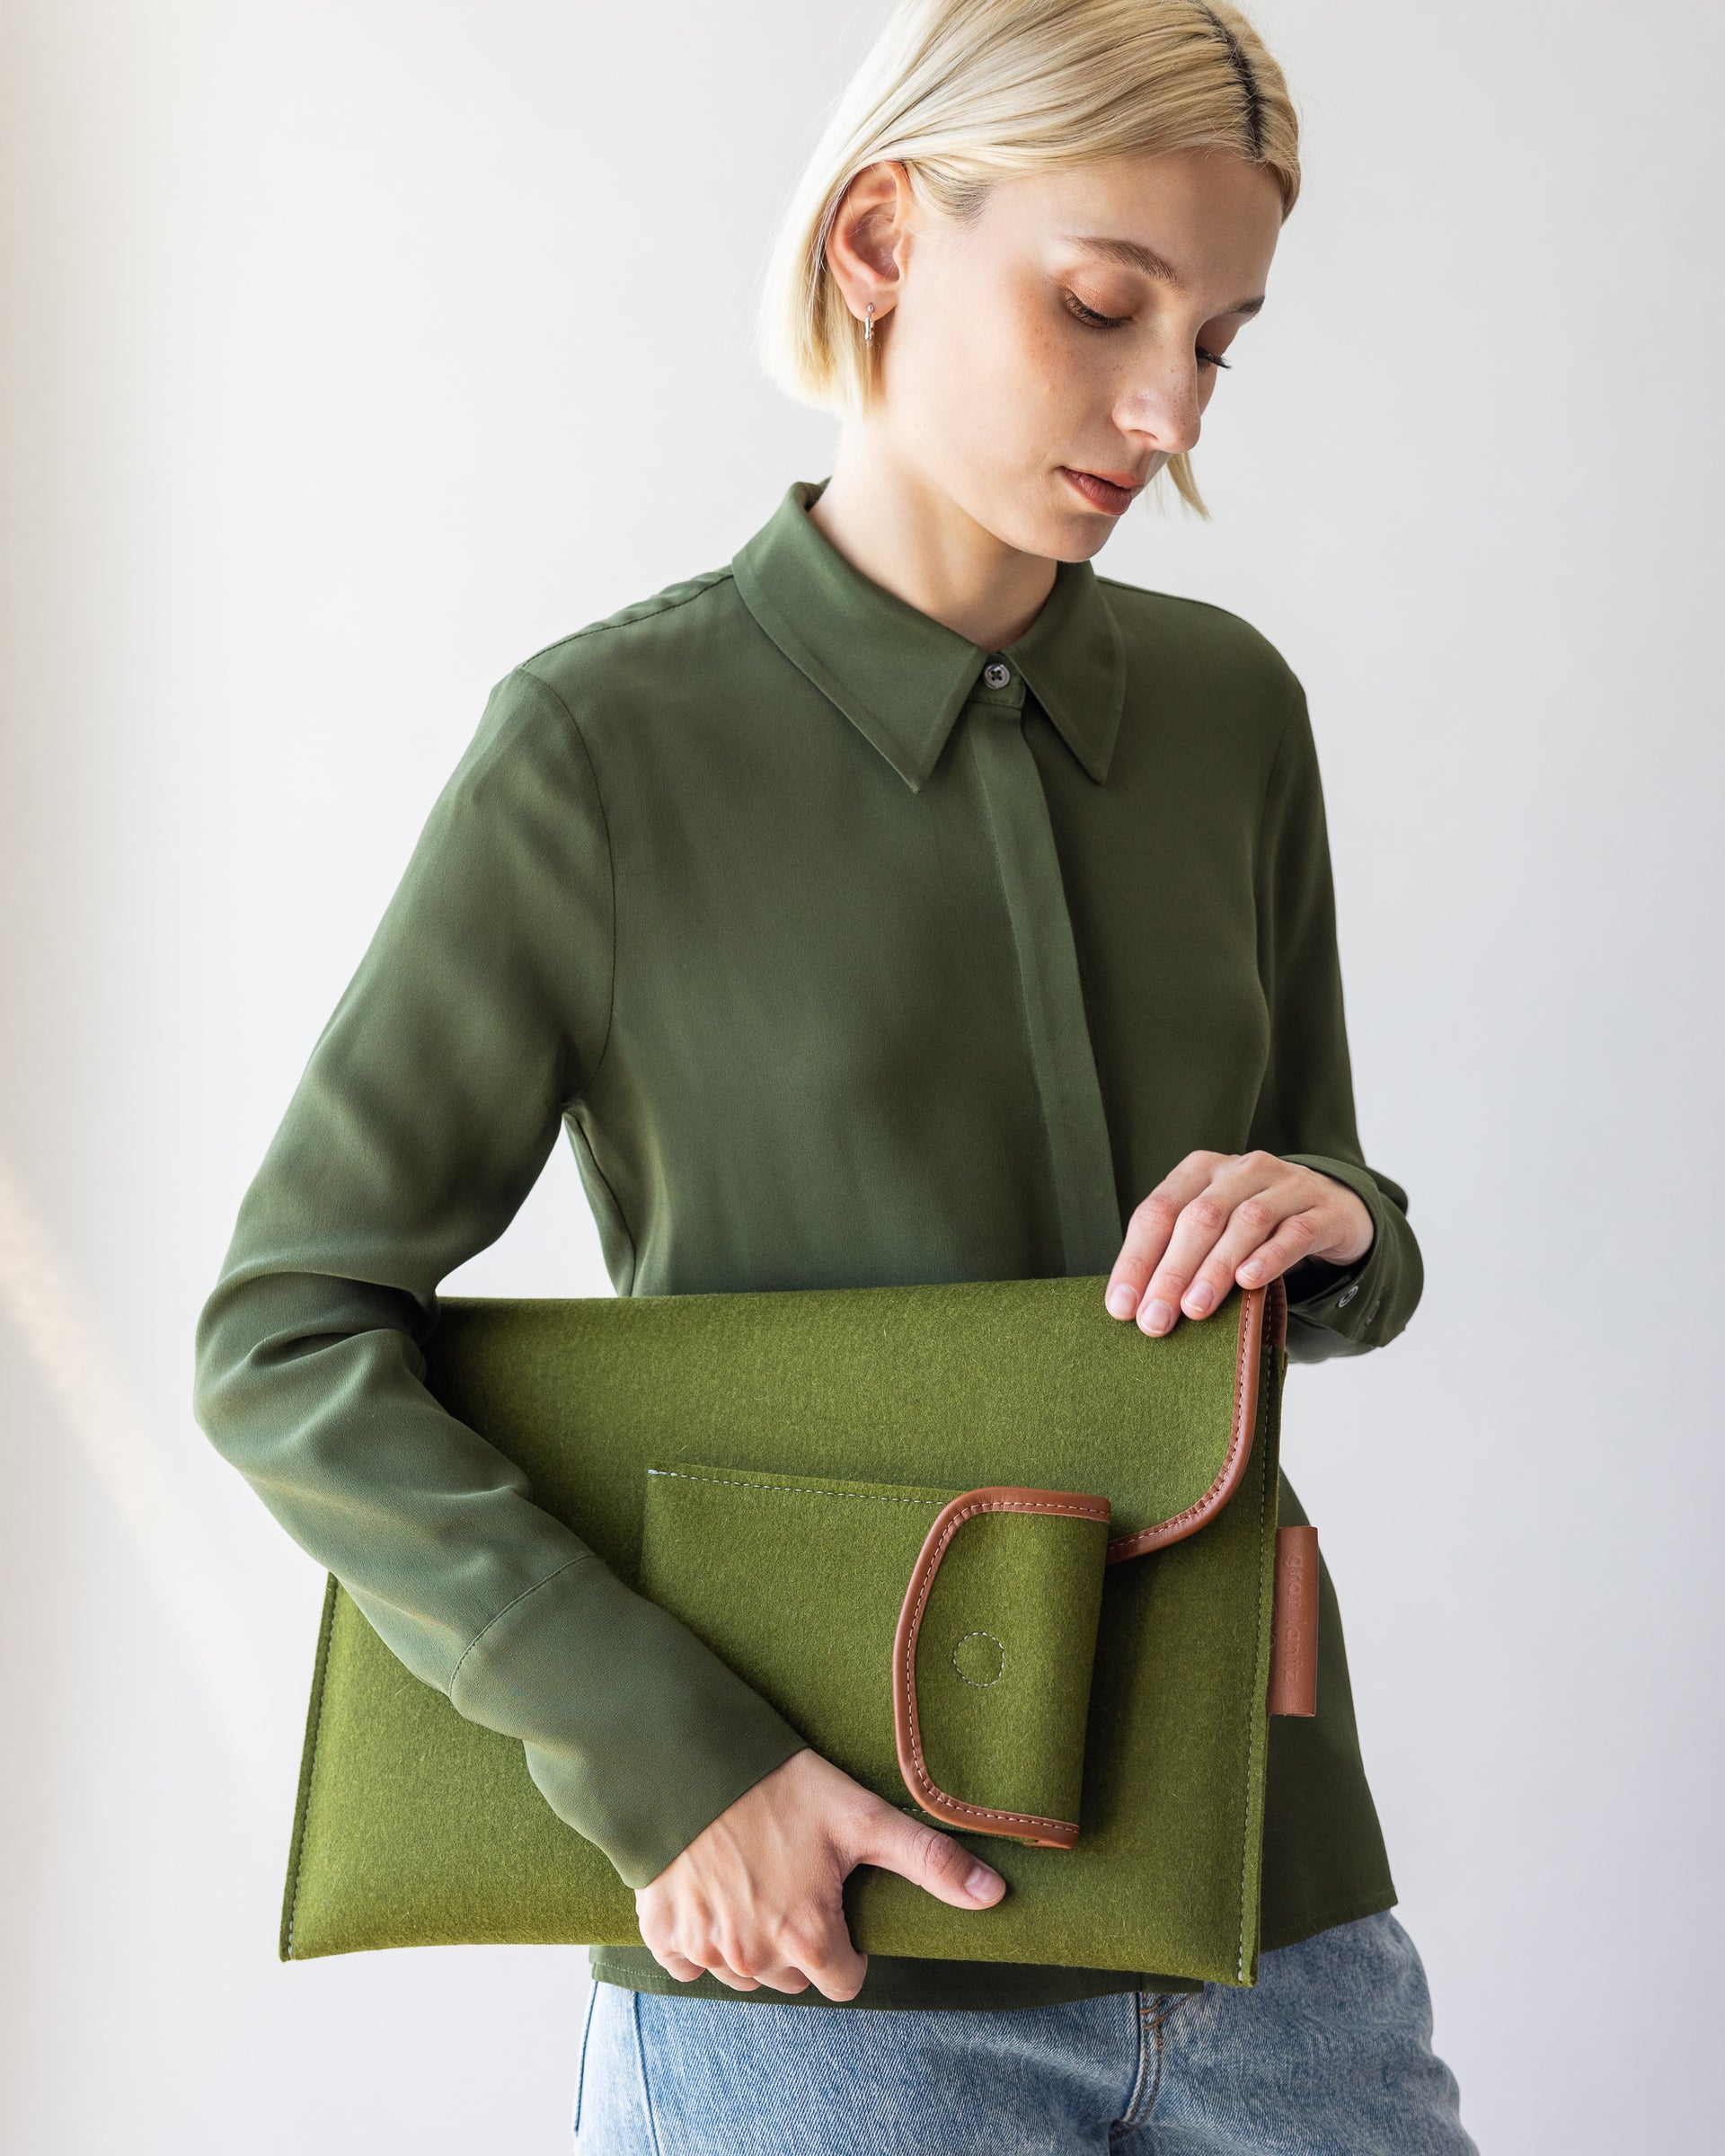 Envelope Merino Wool Tech Sleeve and Envelope Accessory Sleeve in moss color held by a stylish woman in one hand by her side